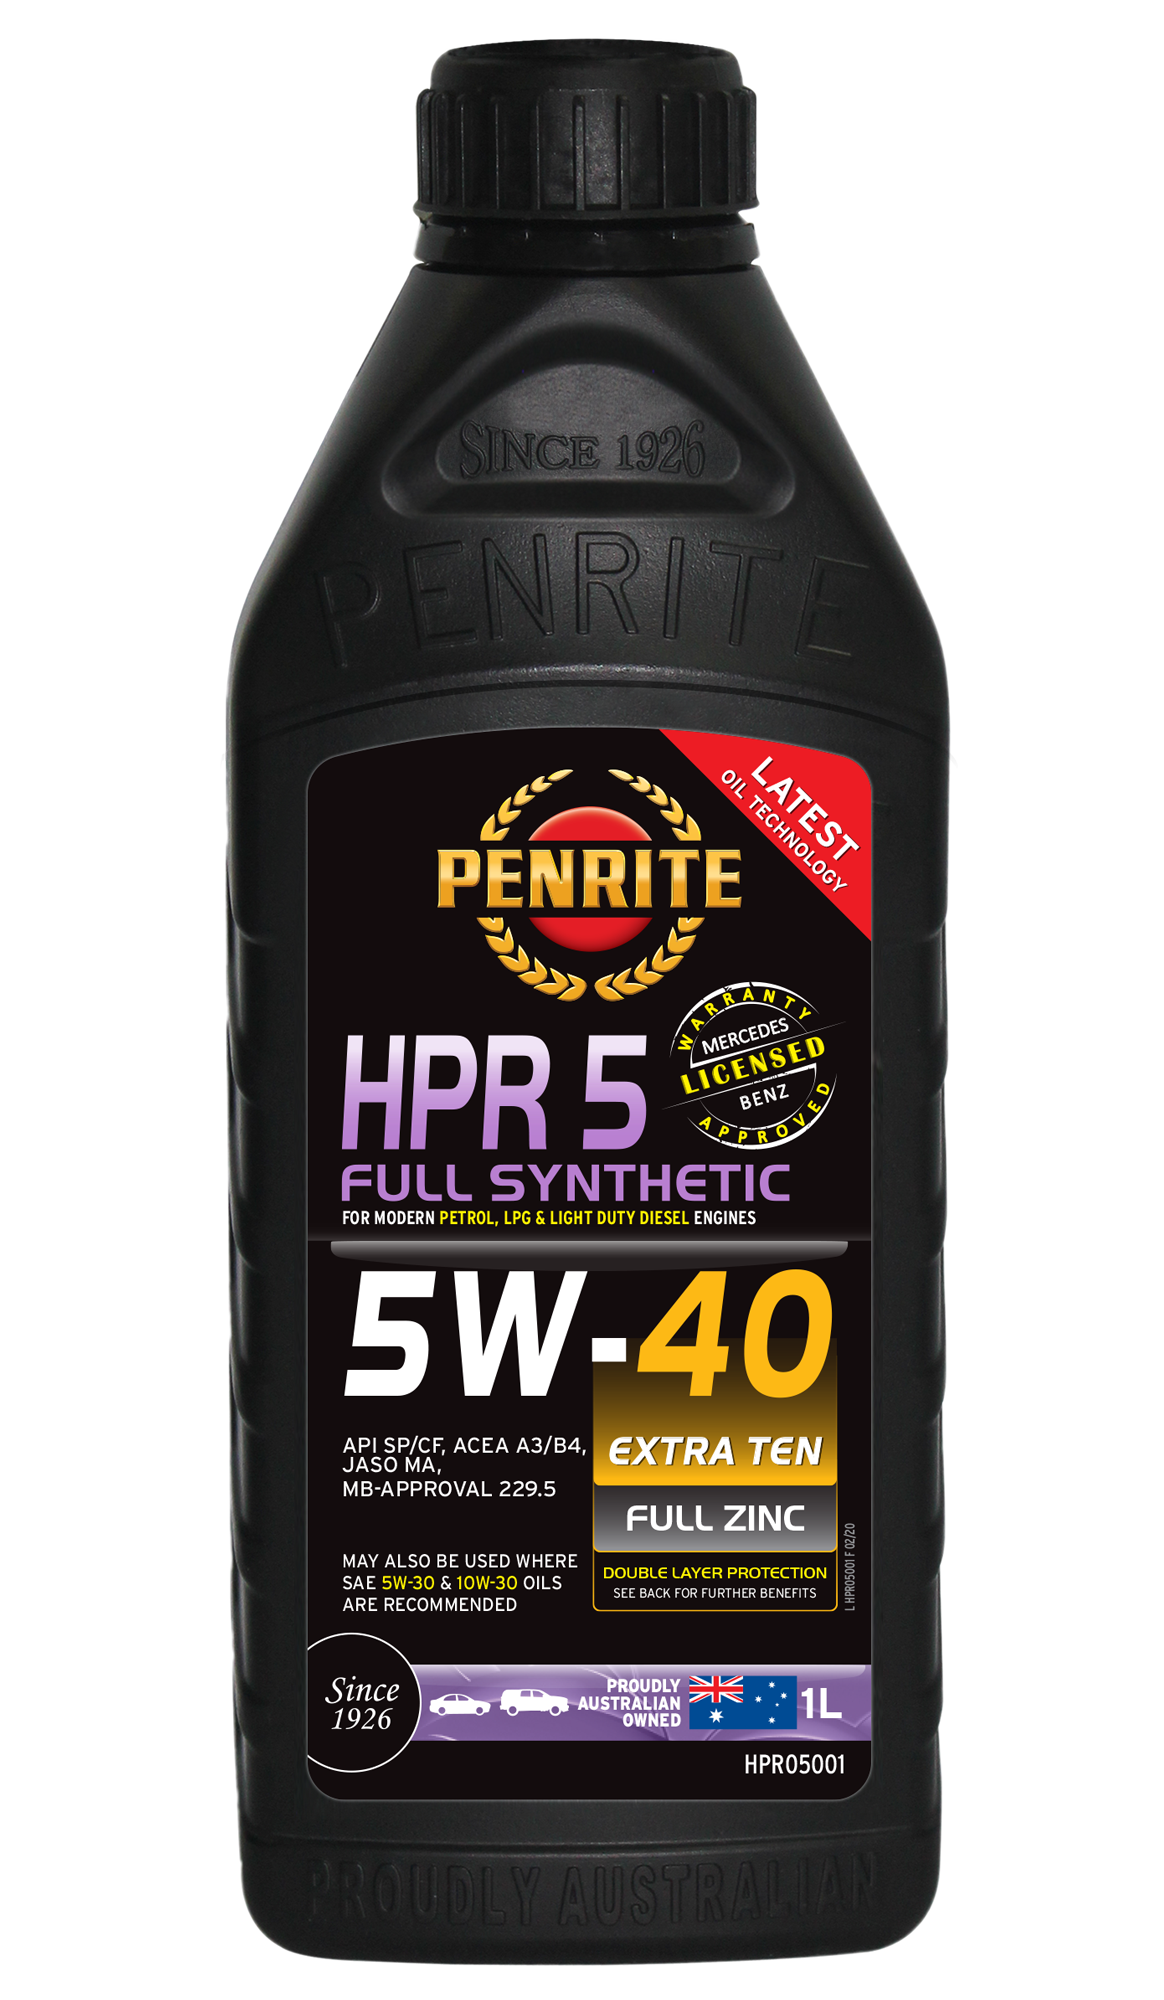 HPR 5 5W-40 (Full Synthetic) - Penrite | Universal Auto Spares